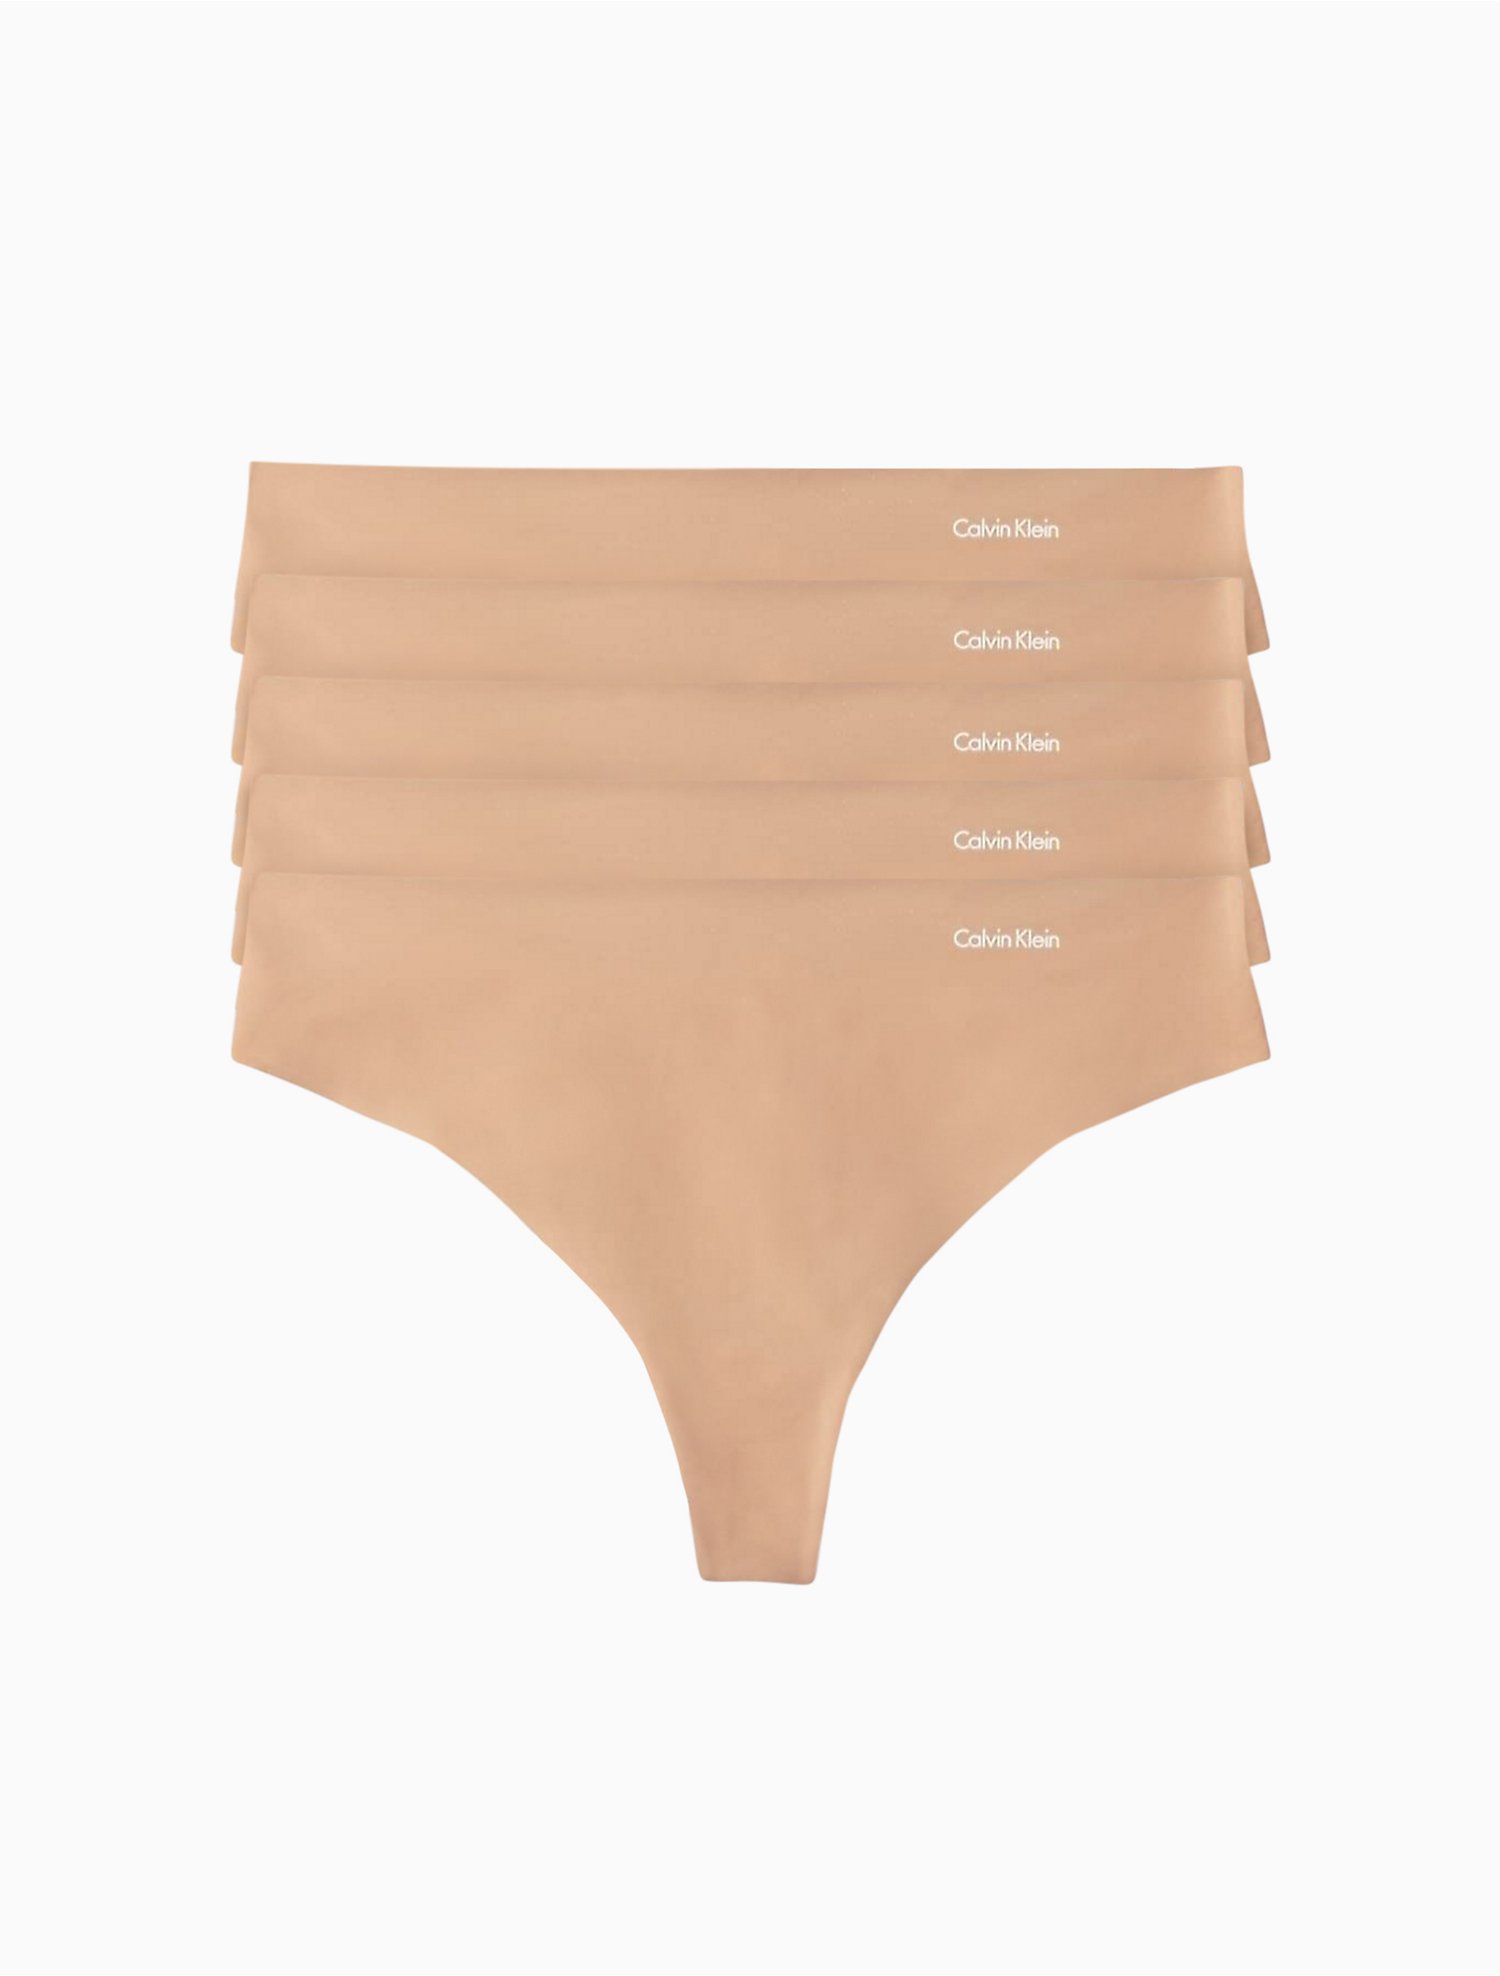 Invisibles 5-Pack Thong | Calvin Klein® USA